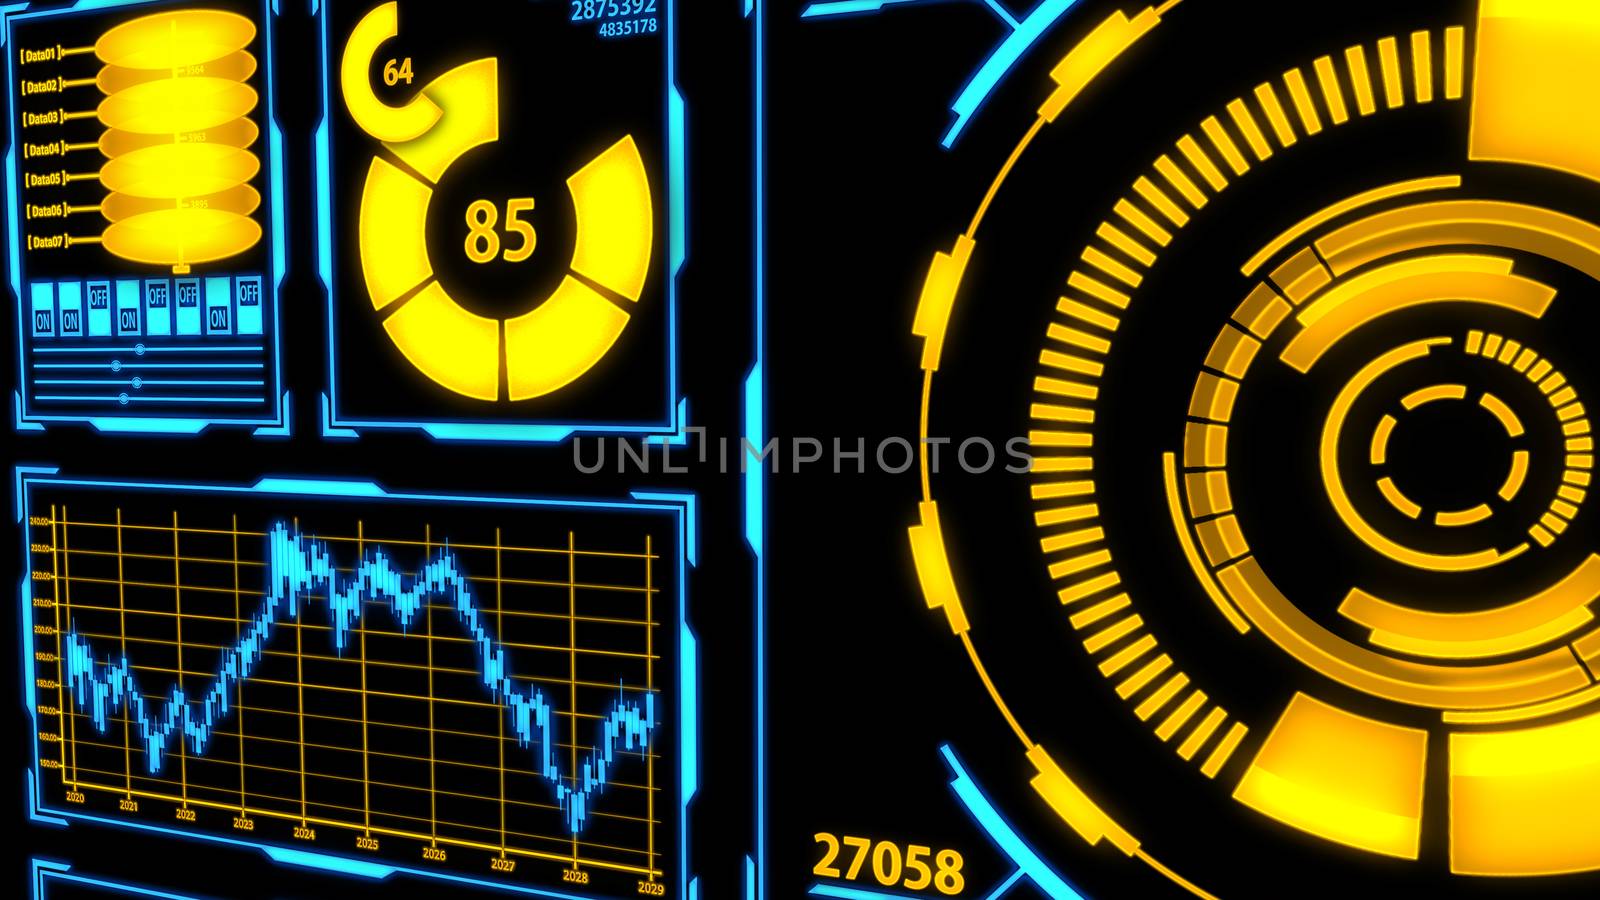 Data Transmission and Digital Transformation Screen with Details in Yellow-Blue color theme including Panels, Graphs, Charts , 3D Earth and digital elements Ver.3